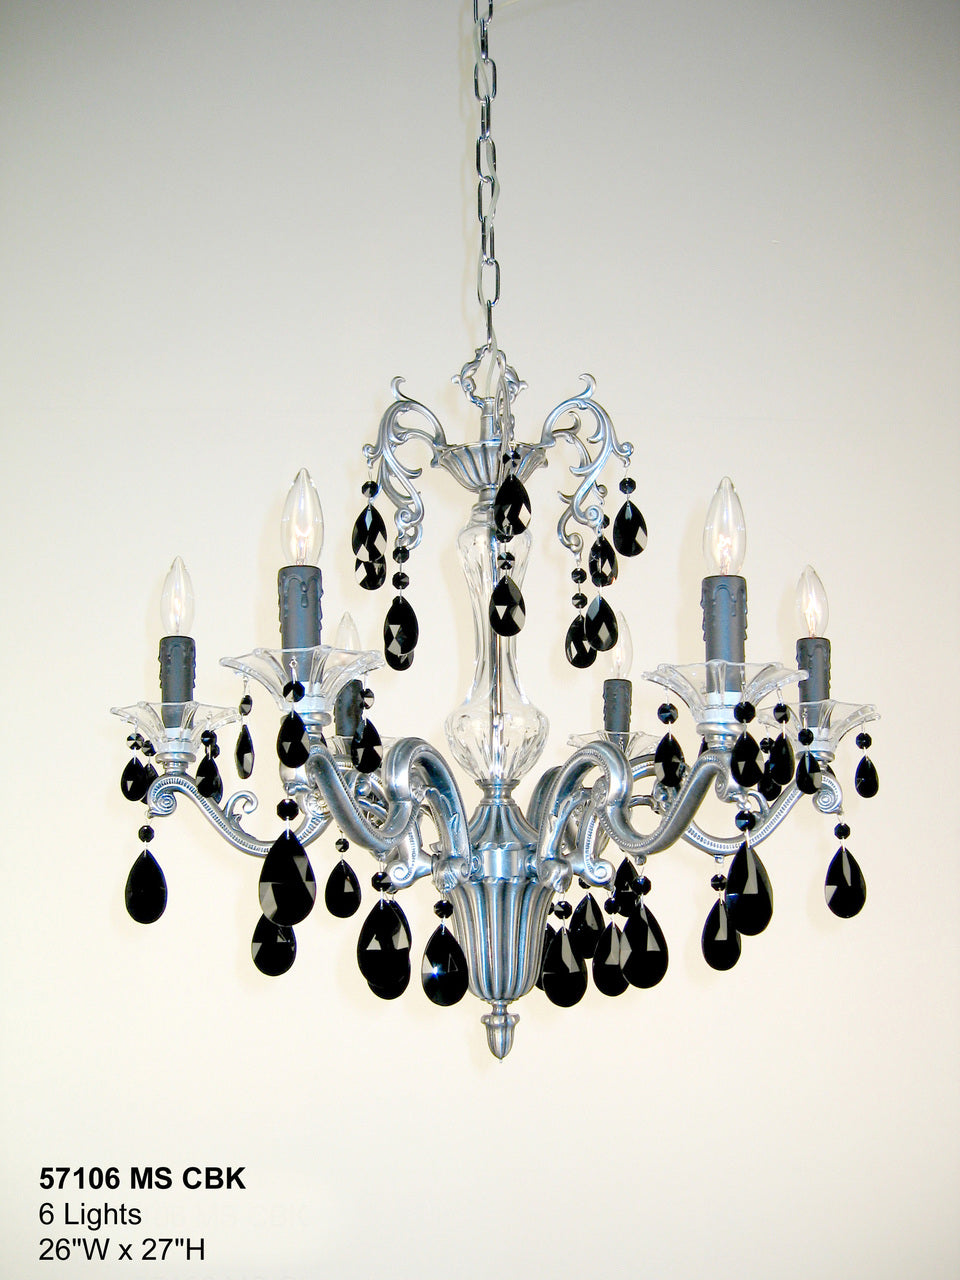 Classic Lighting 57106 MS CBK Via Firenze Crystal Chandelier in Millennium Silver (Imported from Spain)